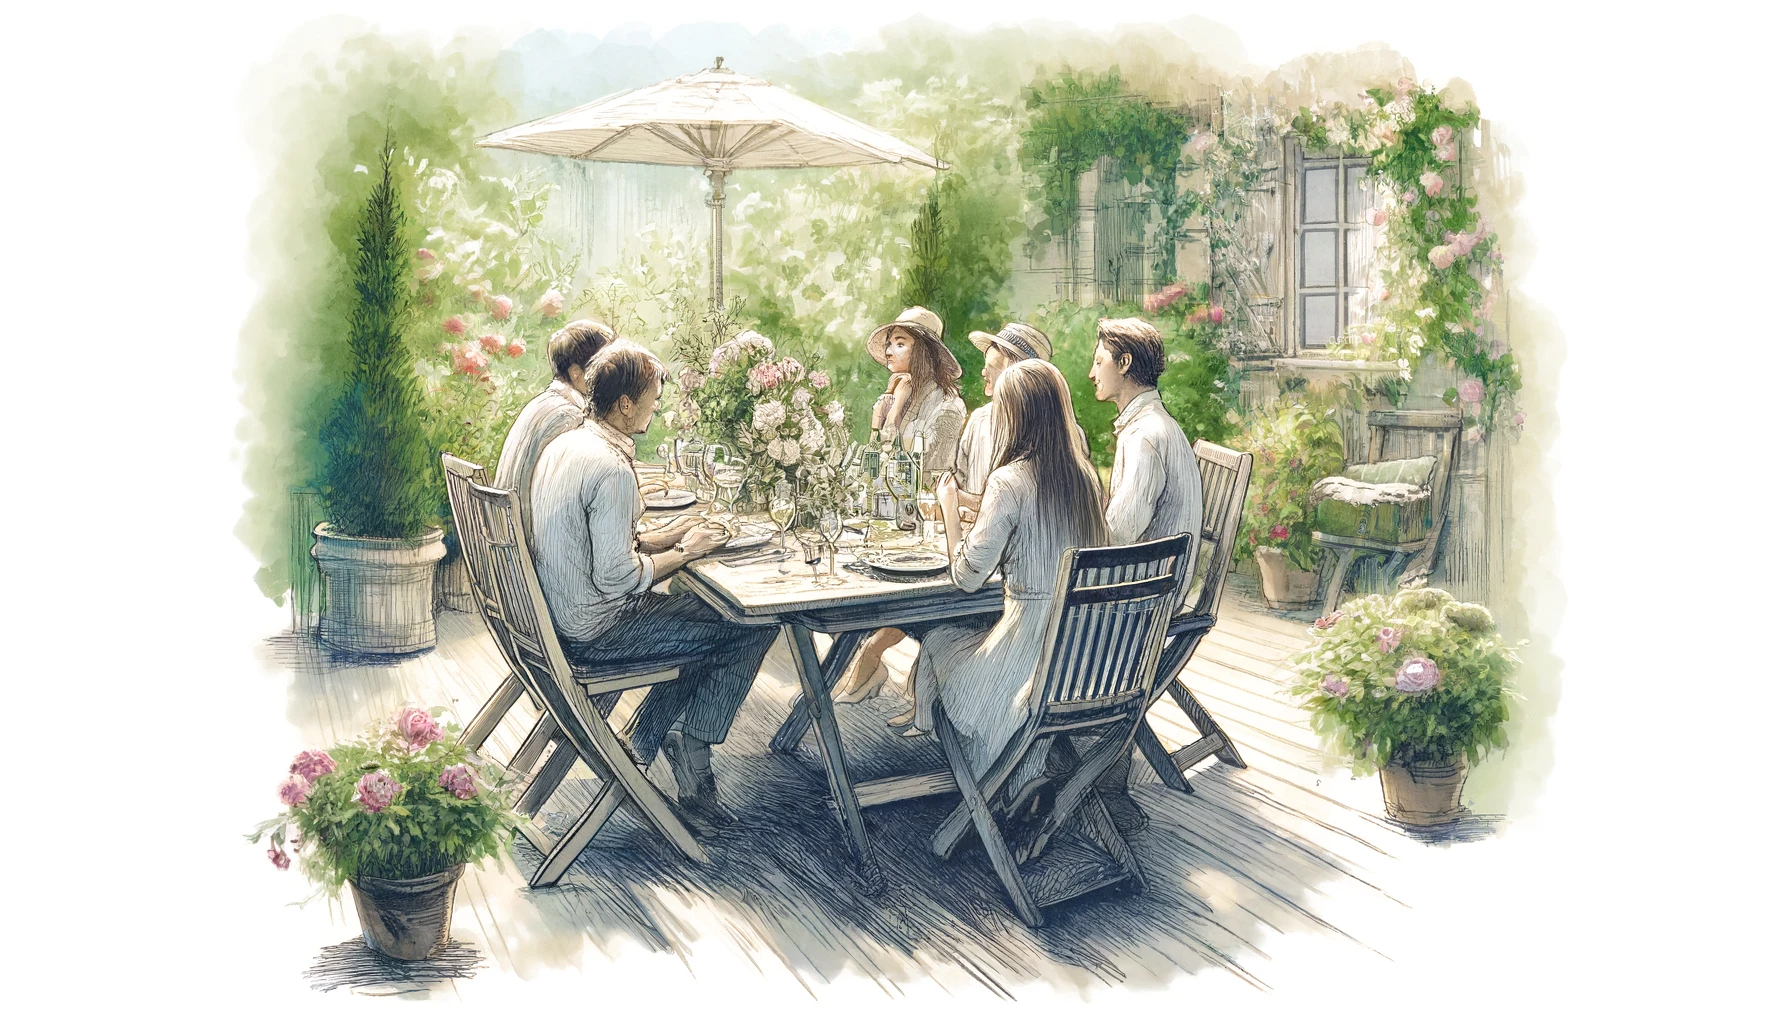 "Tranquil watercolor sketch of a small group dining outdoors in a French garden, emphasizing leisurely meals and engaging conversations, reflecting the philosophical approach to meals in French dining culture."